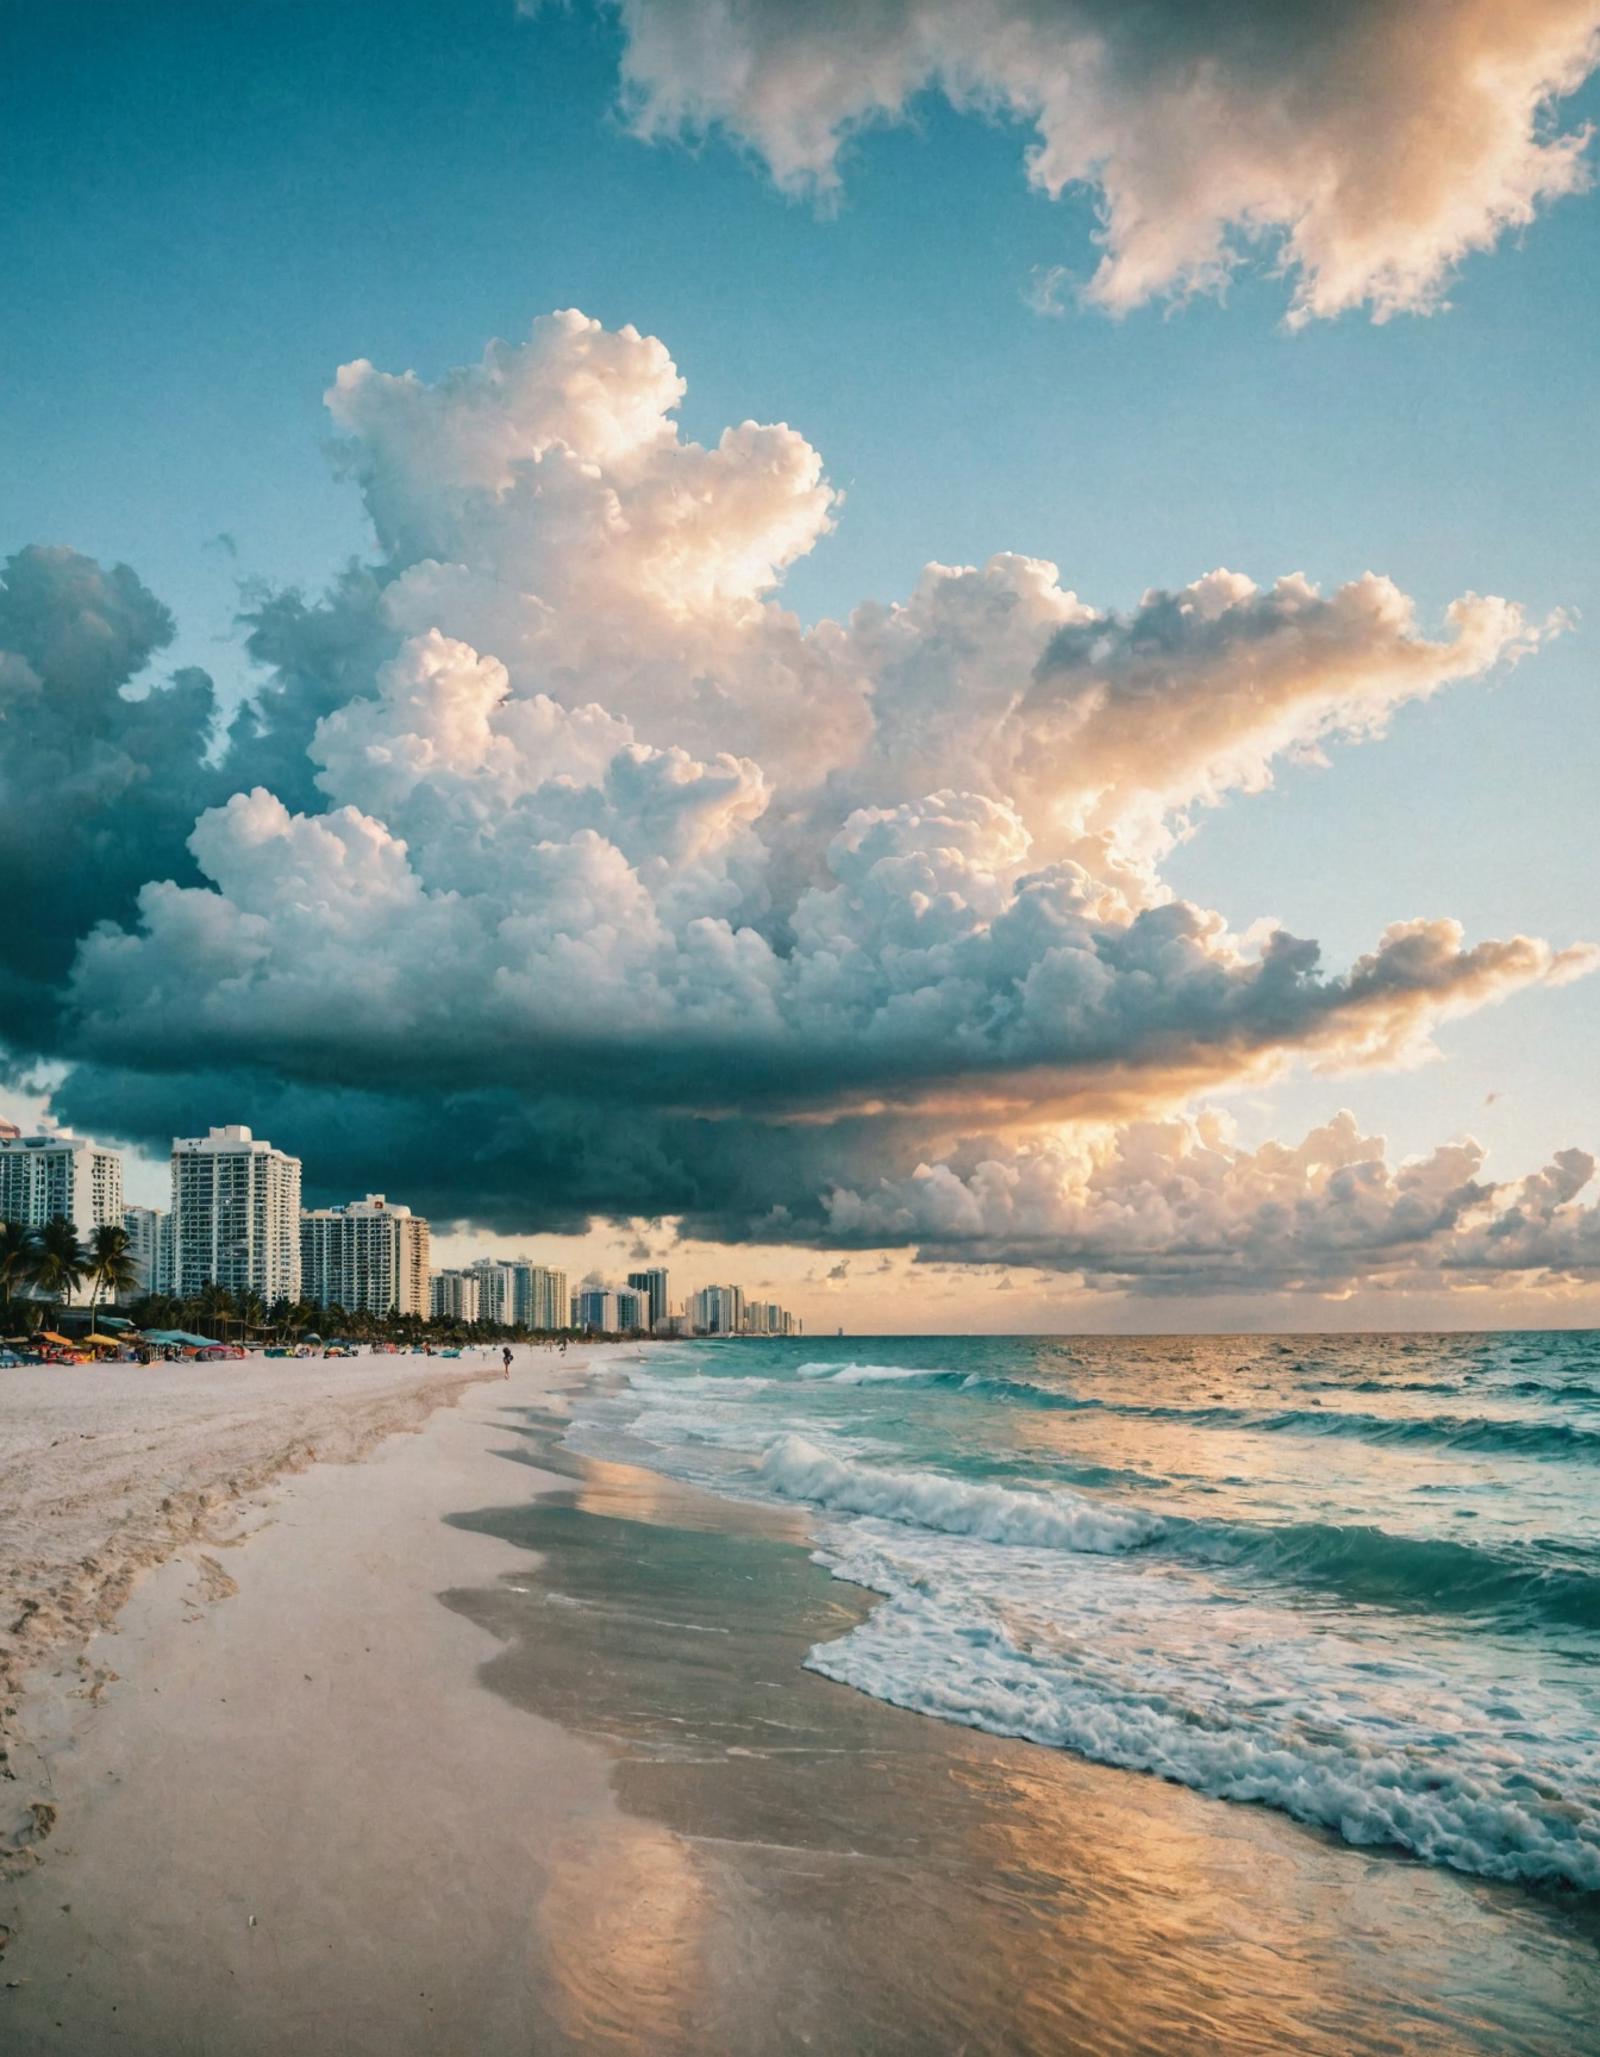 A serene beach scene with a cloudy sky and a person in the distance.